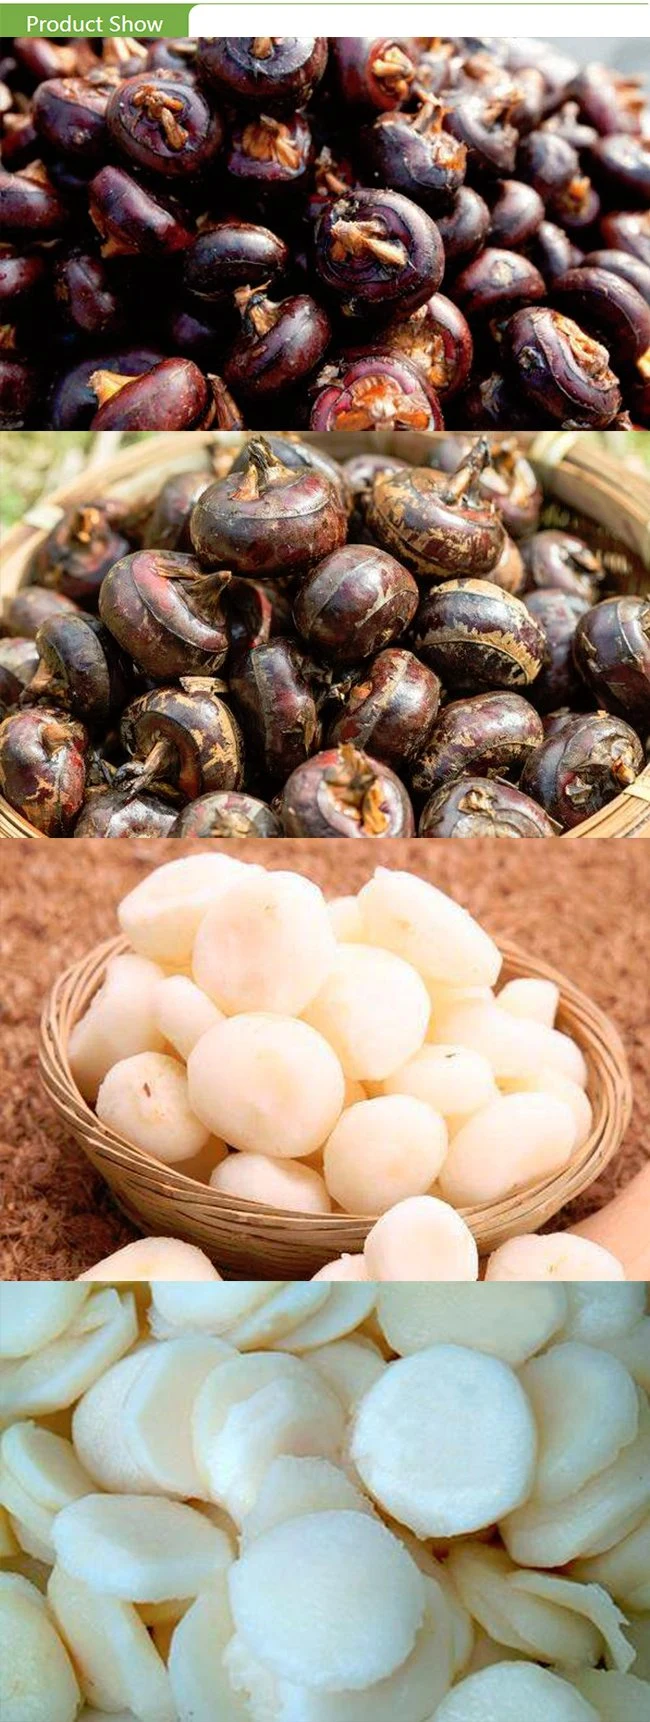 Top Quality Frozen Whole Water Chestnut